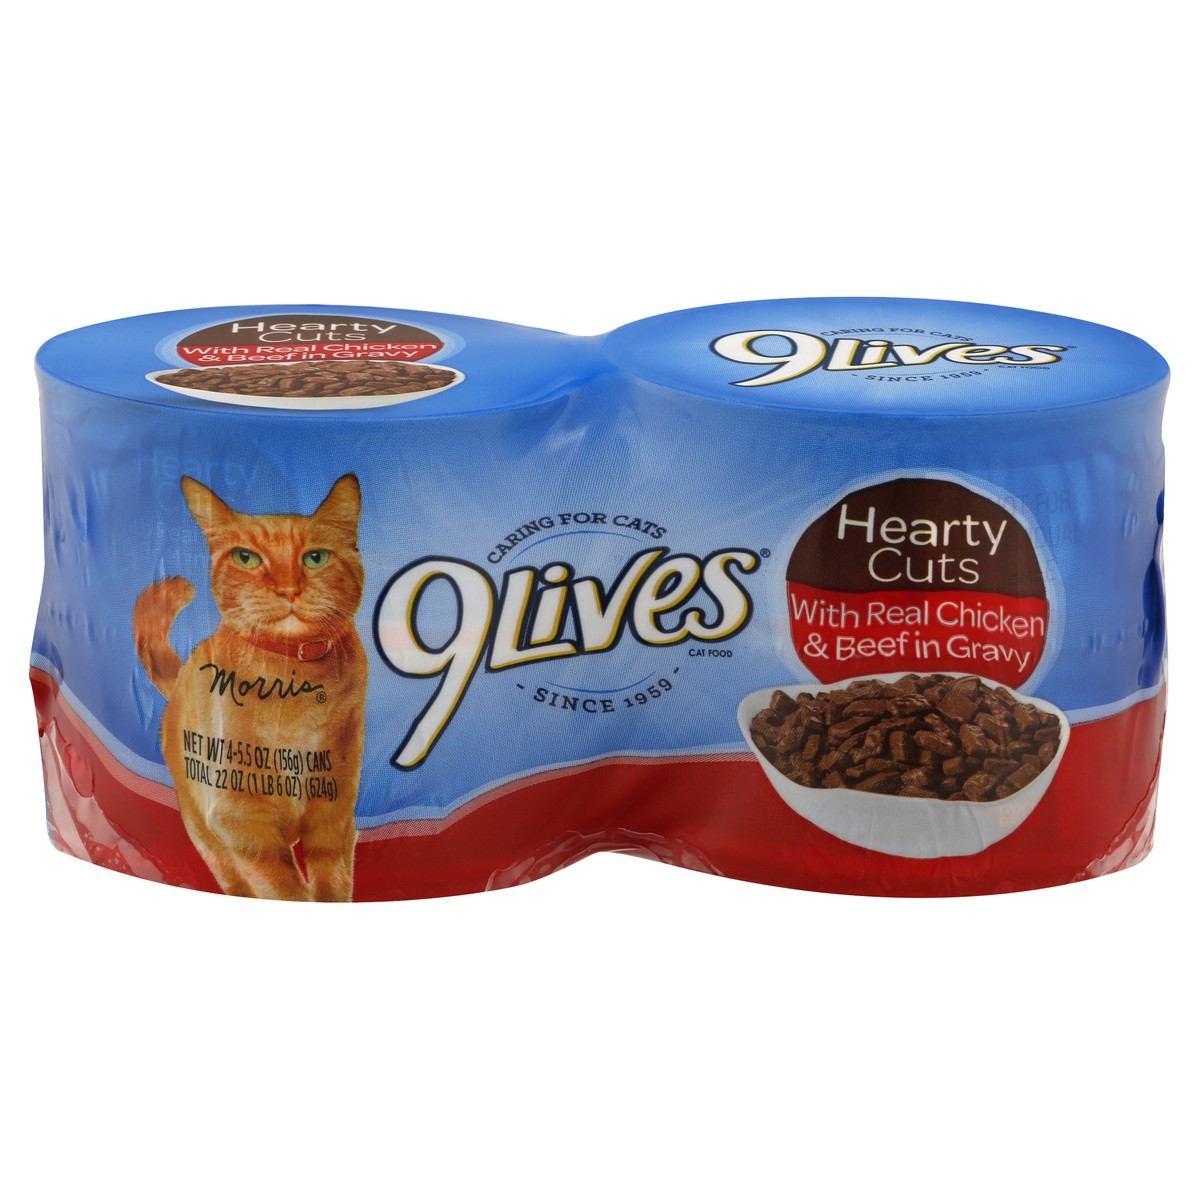 slide 1 of 9, 9Lives Tender Slices with Real Beef in Gravy for Adult Cats, 4 ct